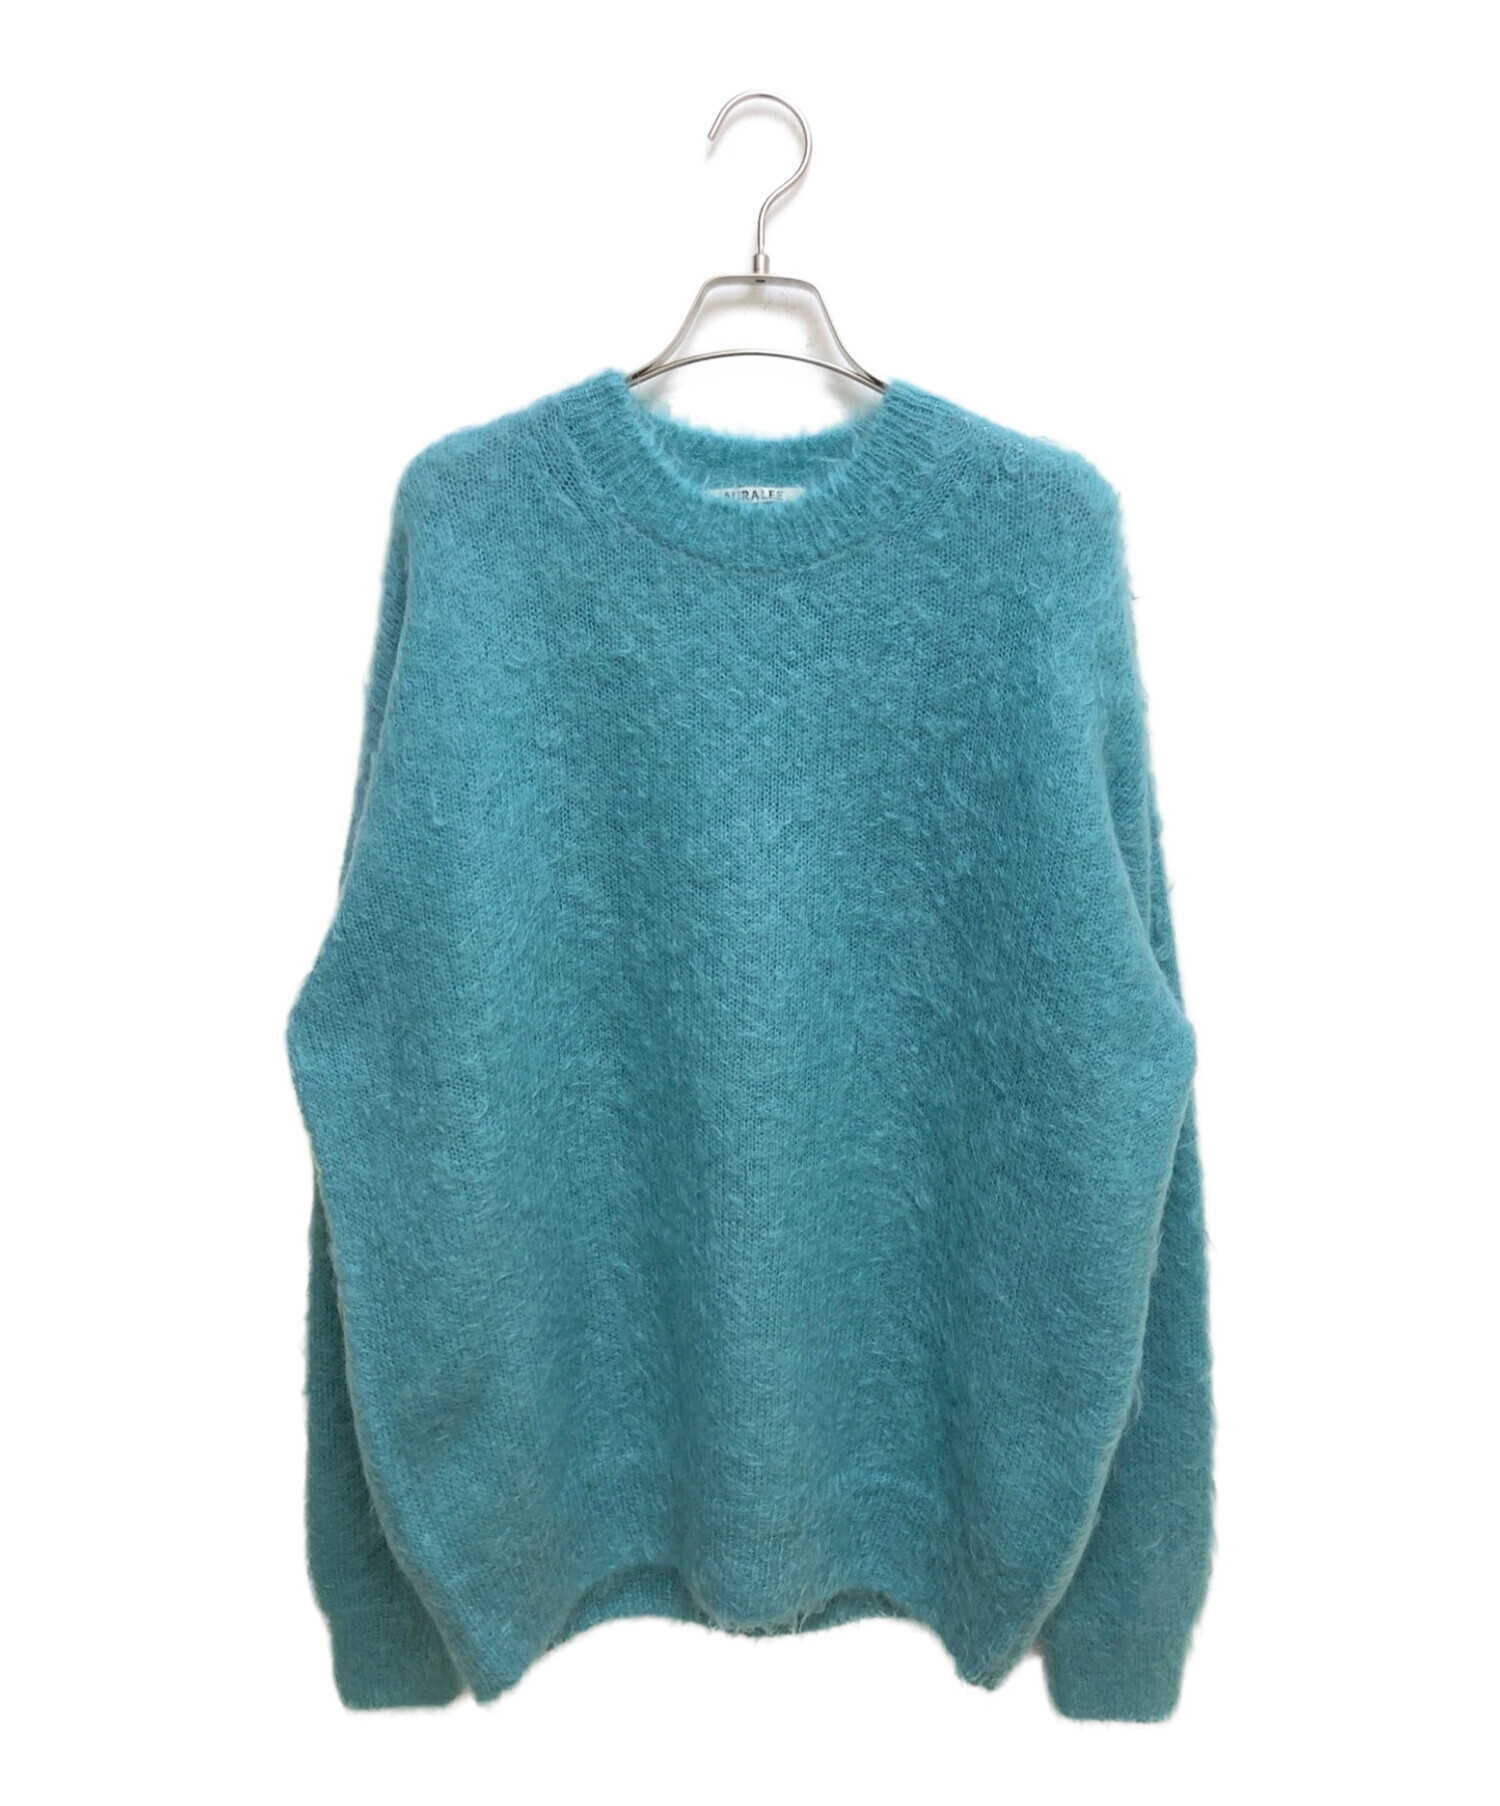 AURALEE (オーラリー) 22AW BRUSHED SUPER KID MOHAIR KNIT P/O ブルー サイズ:SIZE 3